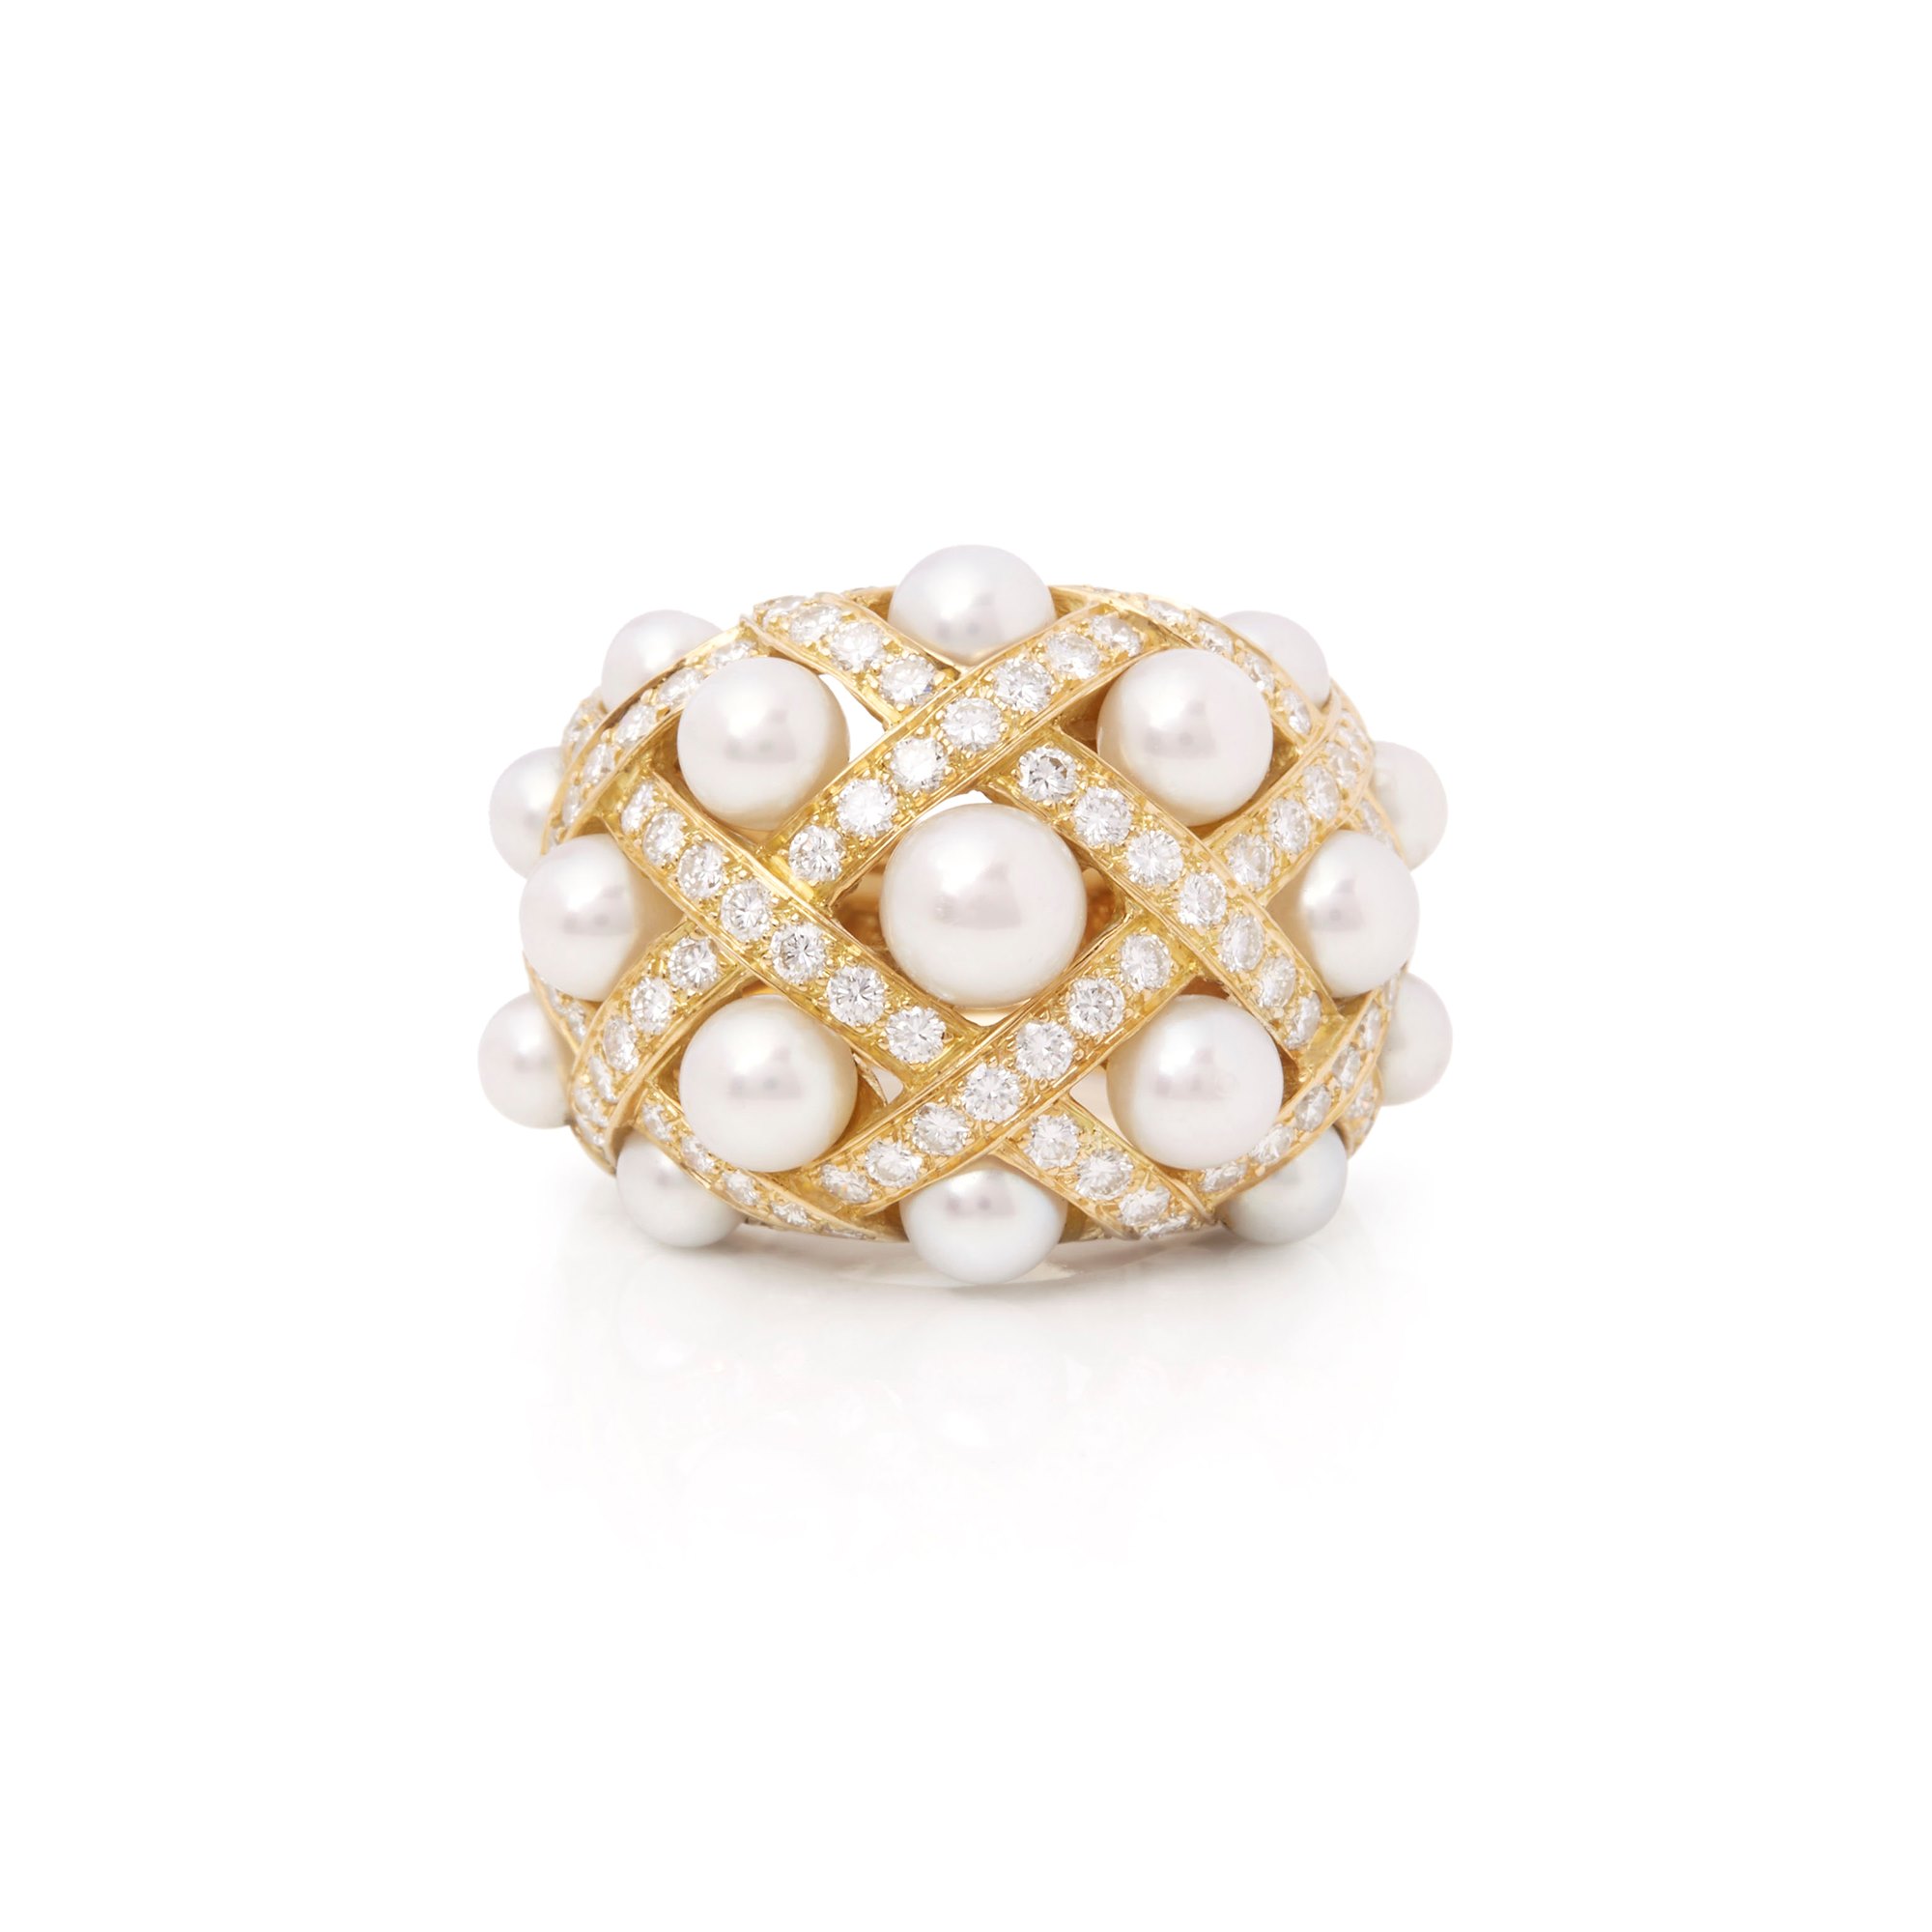 Chanel 18k Yellow Gold Cultured Pearl Baroque Matelassé Ring